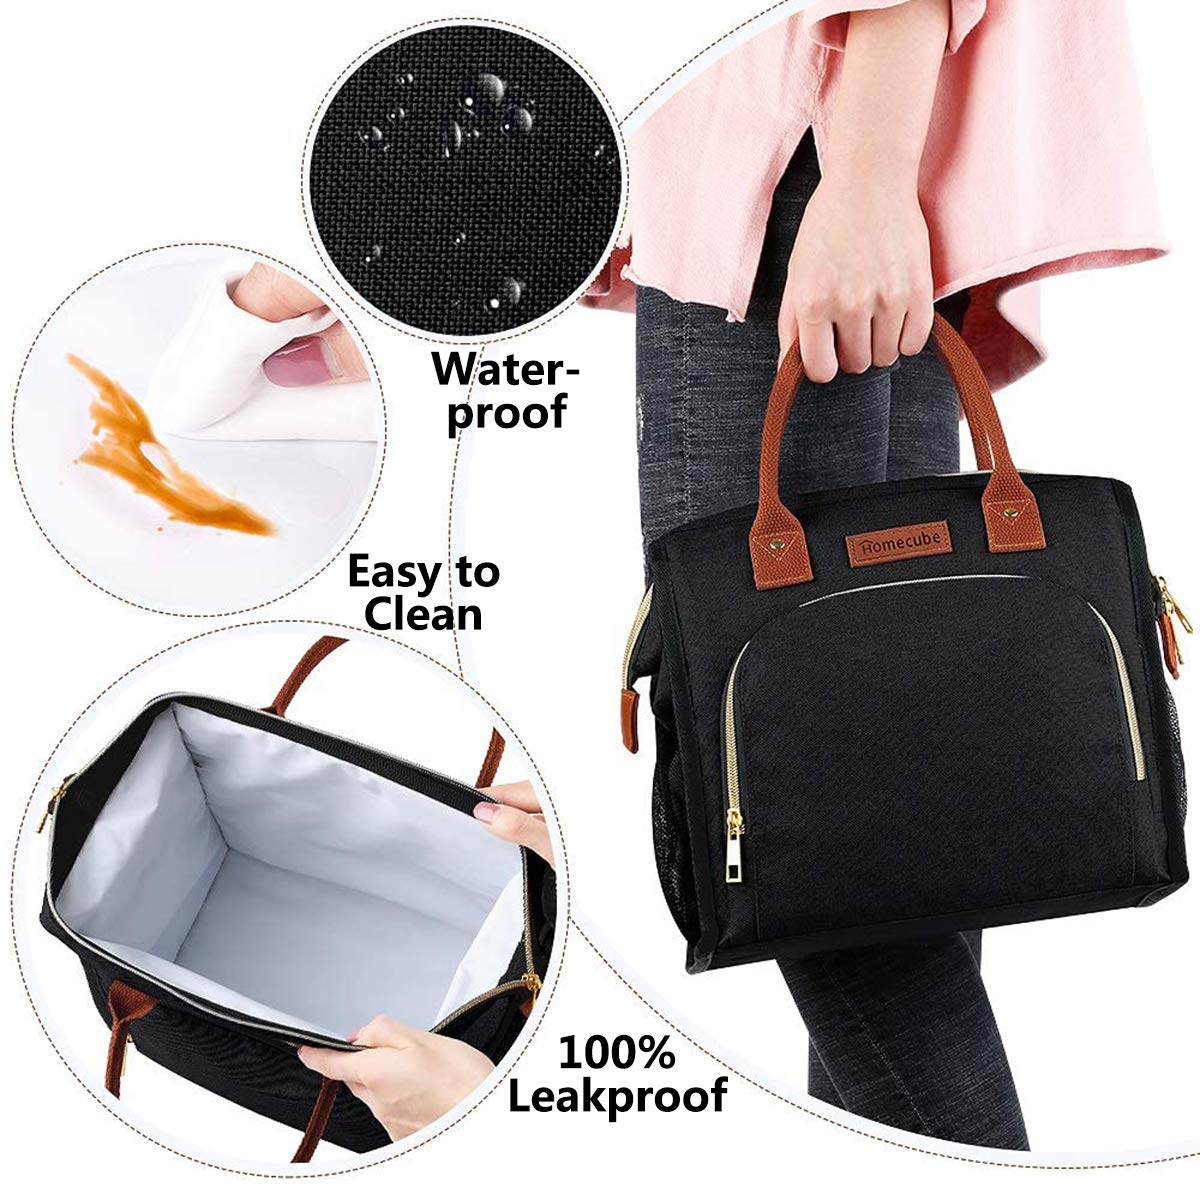 Homecube Lunch Bags Insulated Lunch Box Wide Open Lunch Tote Bag with Pockets Large Capacity Multi-Function for Women Men Black